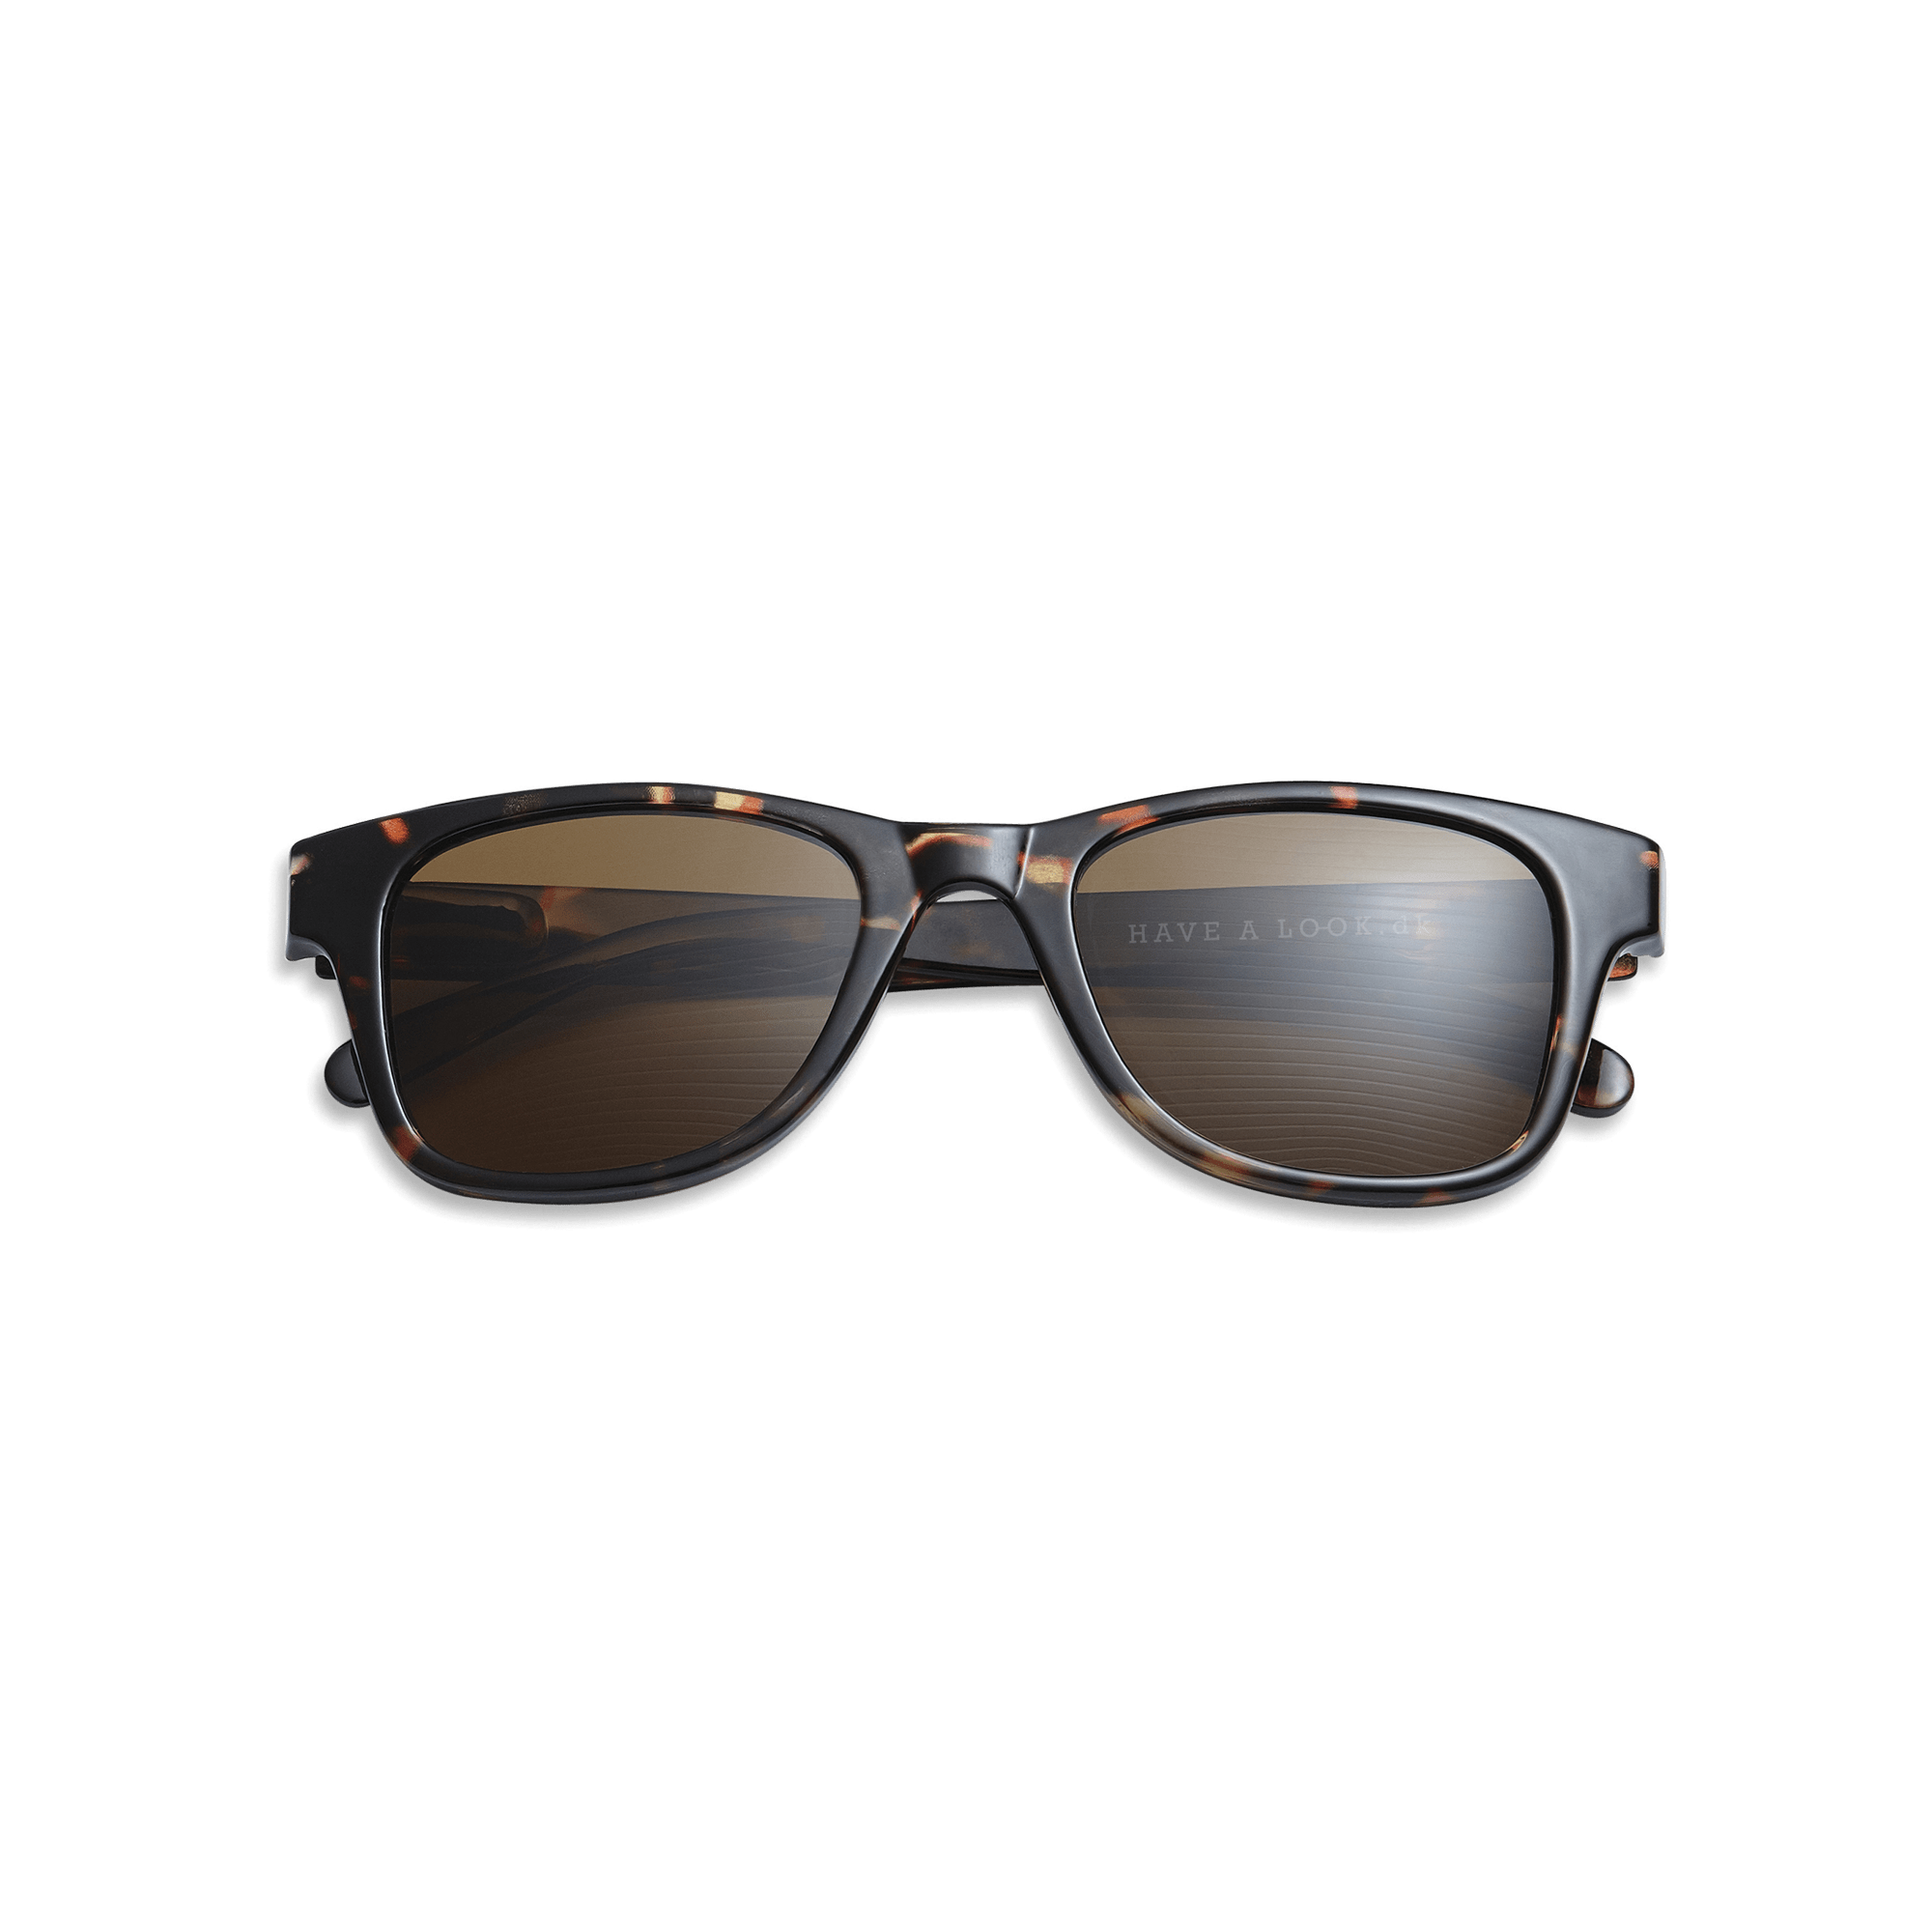 Laura Biagiotti 80's sunglasses decorated with nacre | Sunglasses, Vintage  eyewear, 80s sunglasses